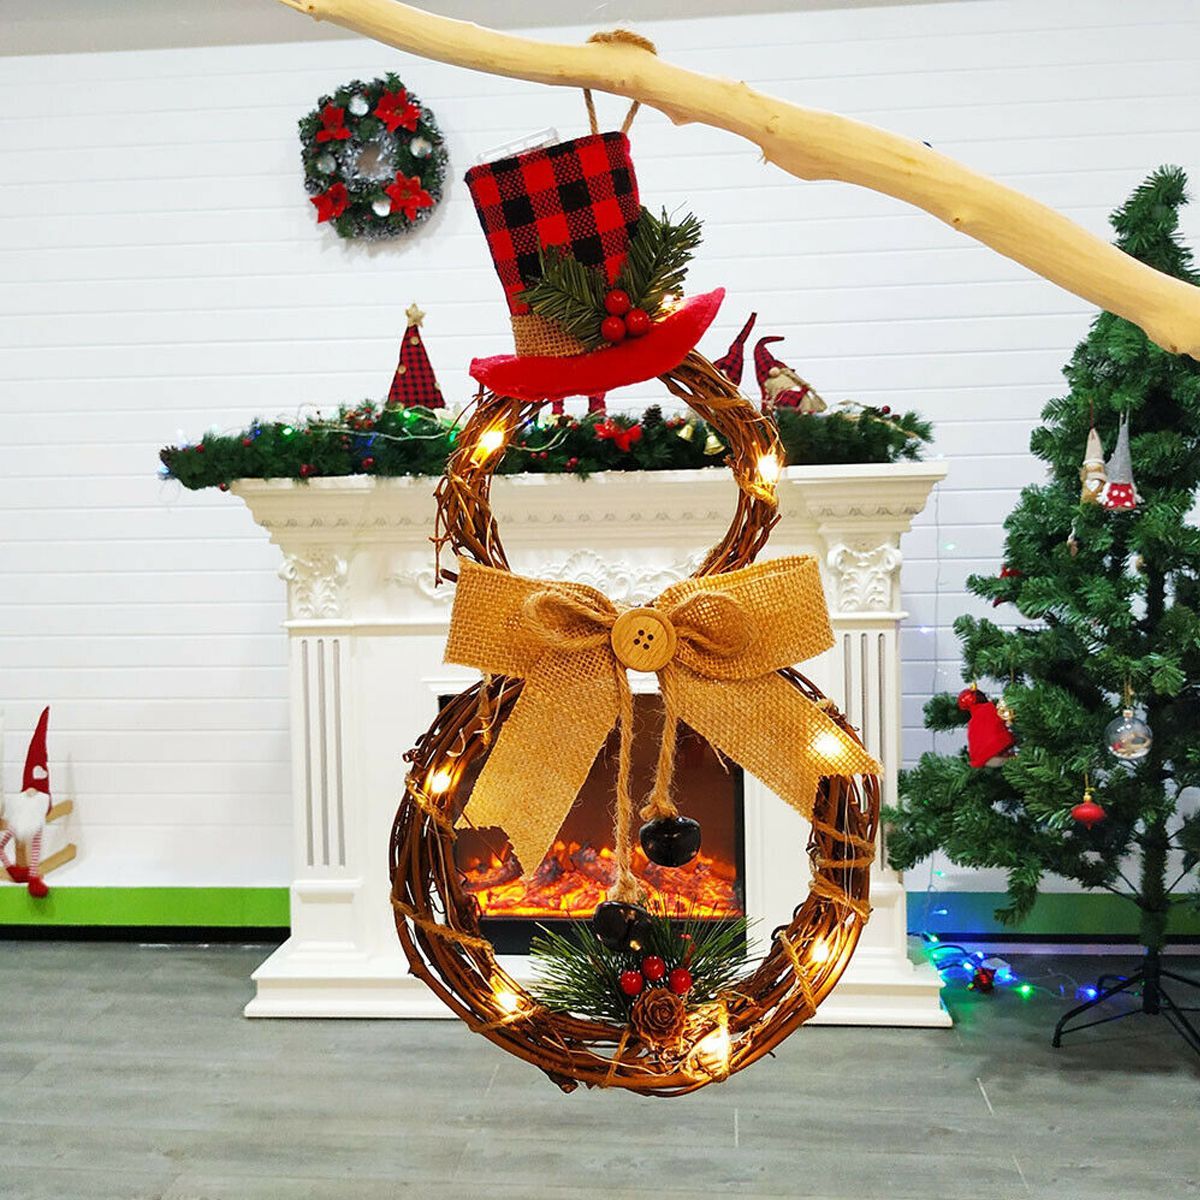 Christmas-LED-Wreath-Garland-Ornament-Hanging-Xmas-Party-Door-Wall-Home-Decorations-1618824